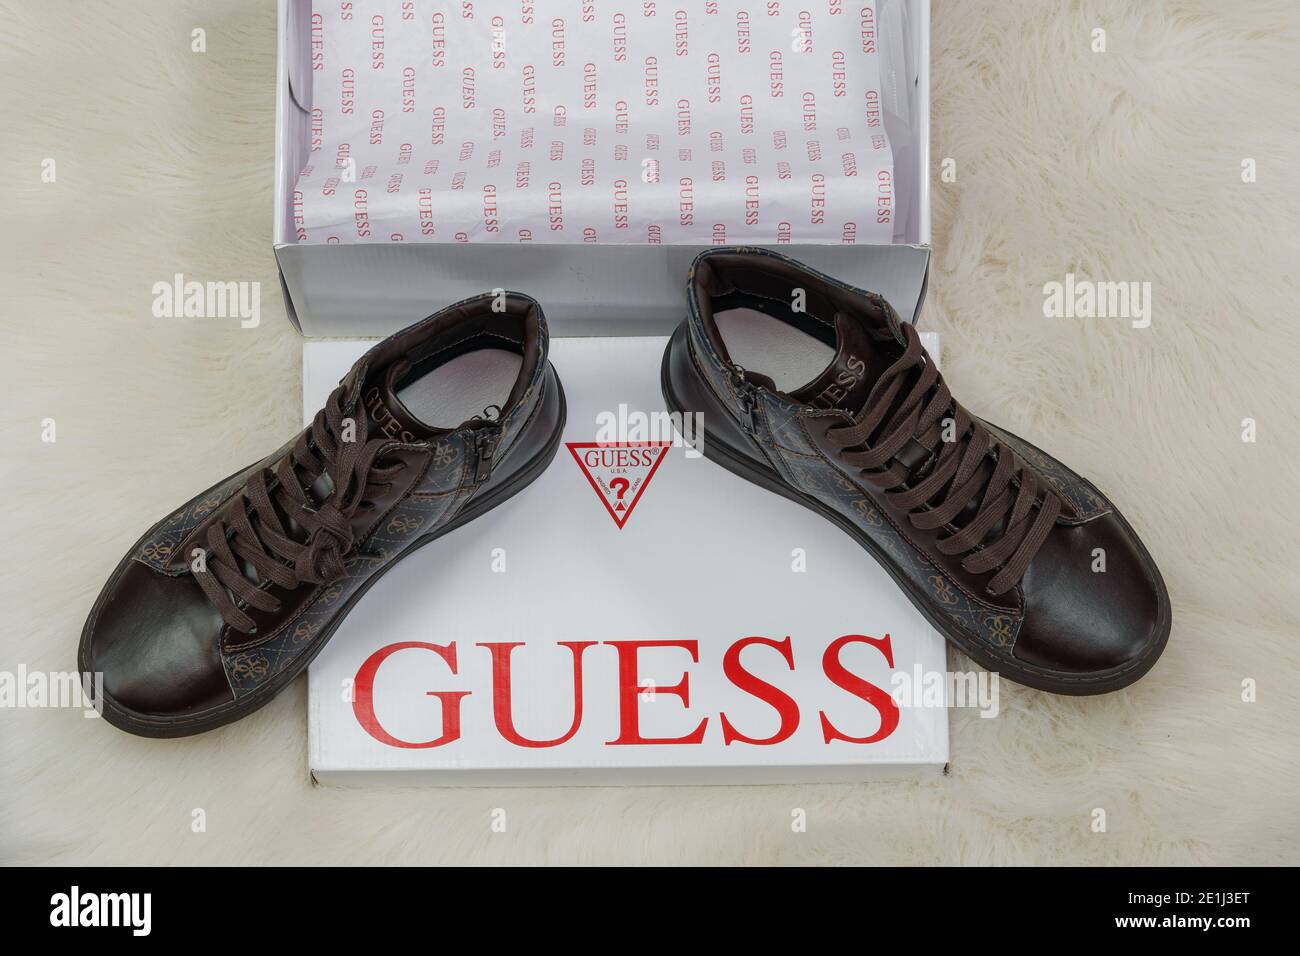 Guess shoes online delivery box display. Open carton order package  containing pair of wearables by famous clothing brand with company logo  Stock Photo - Alamy